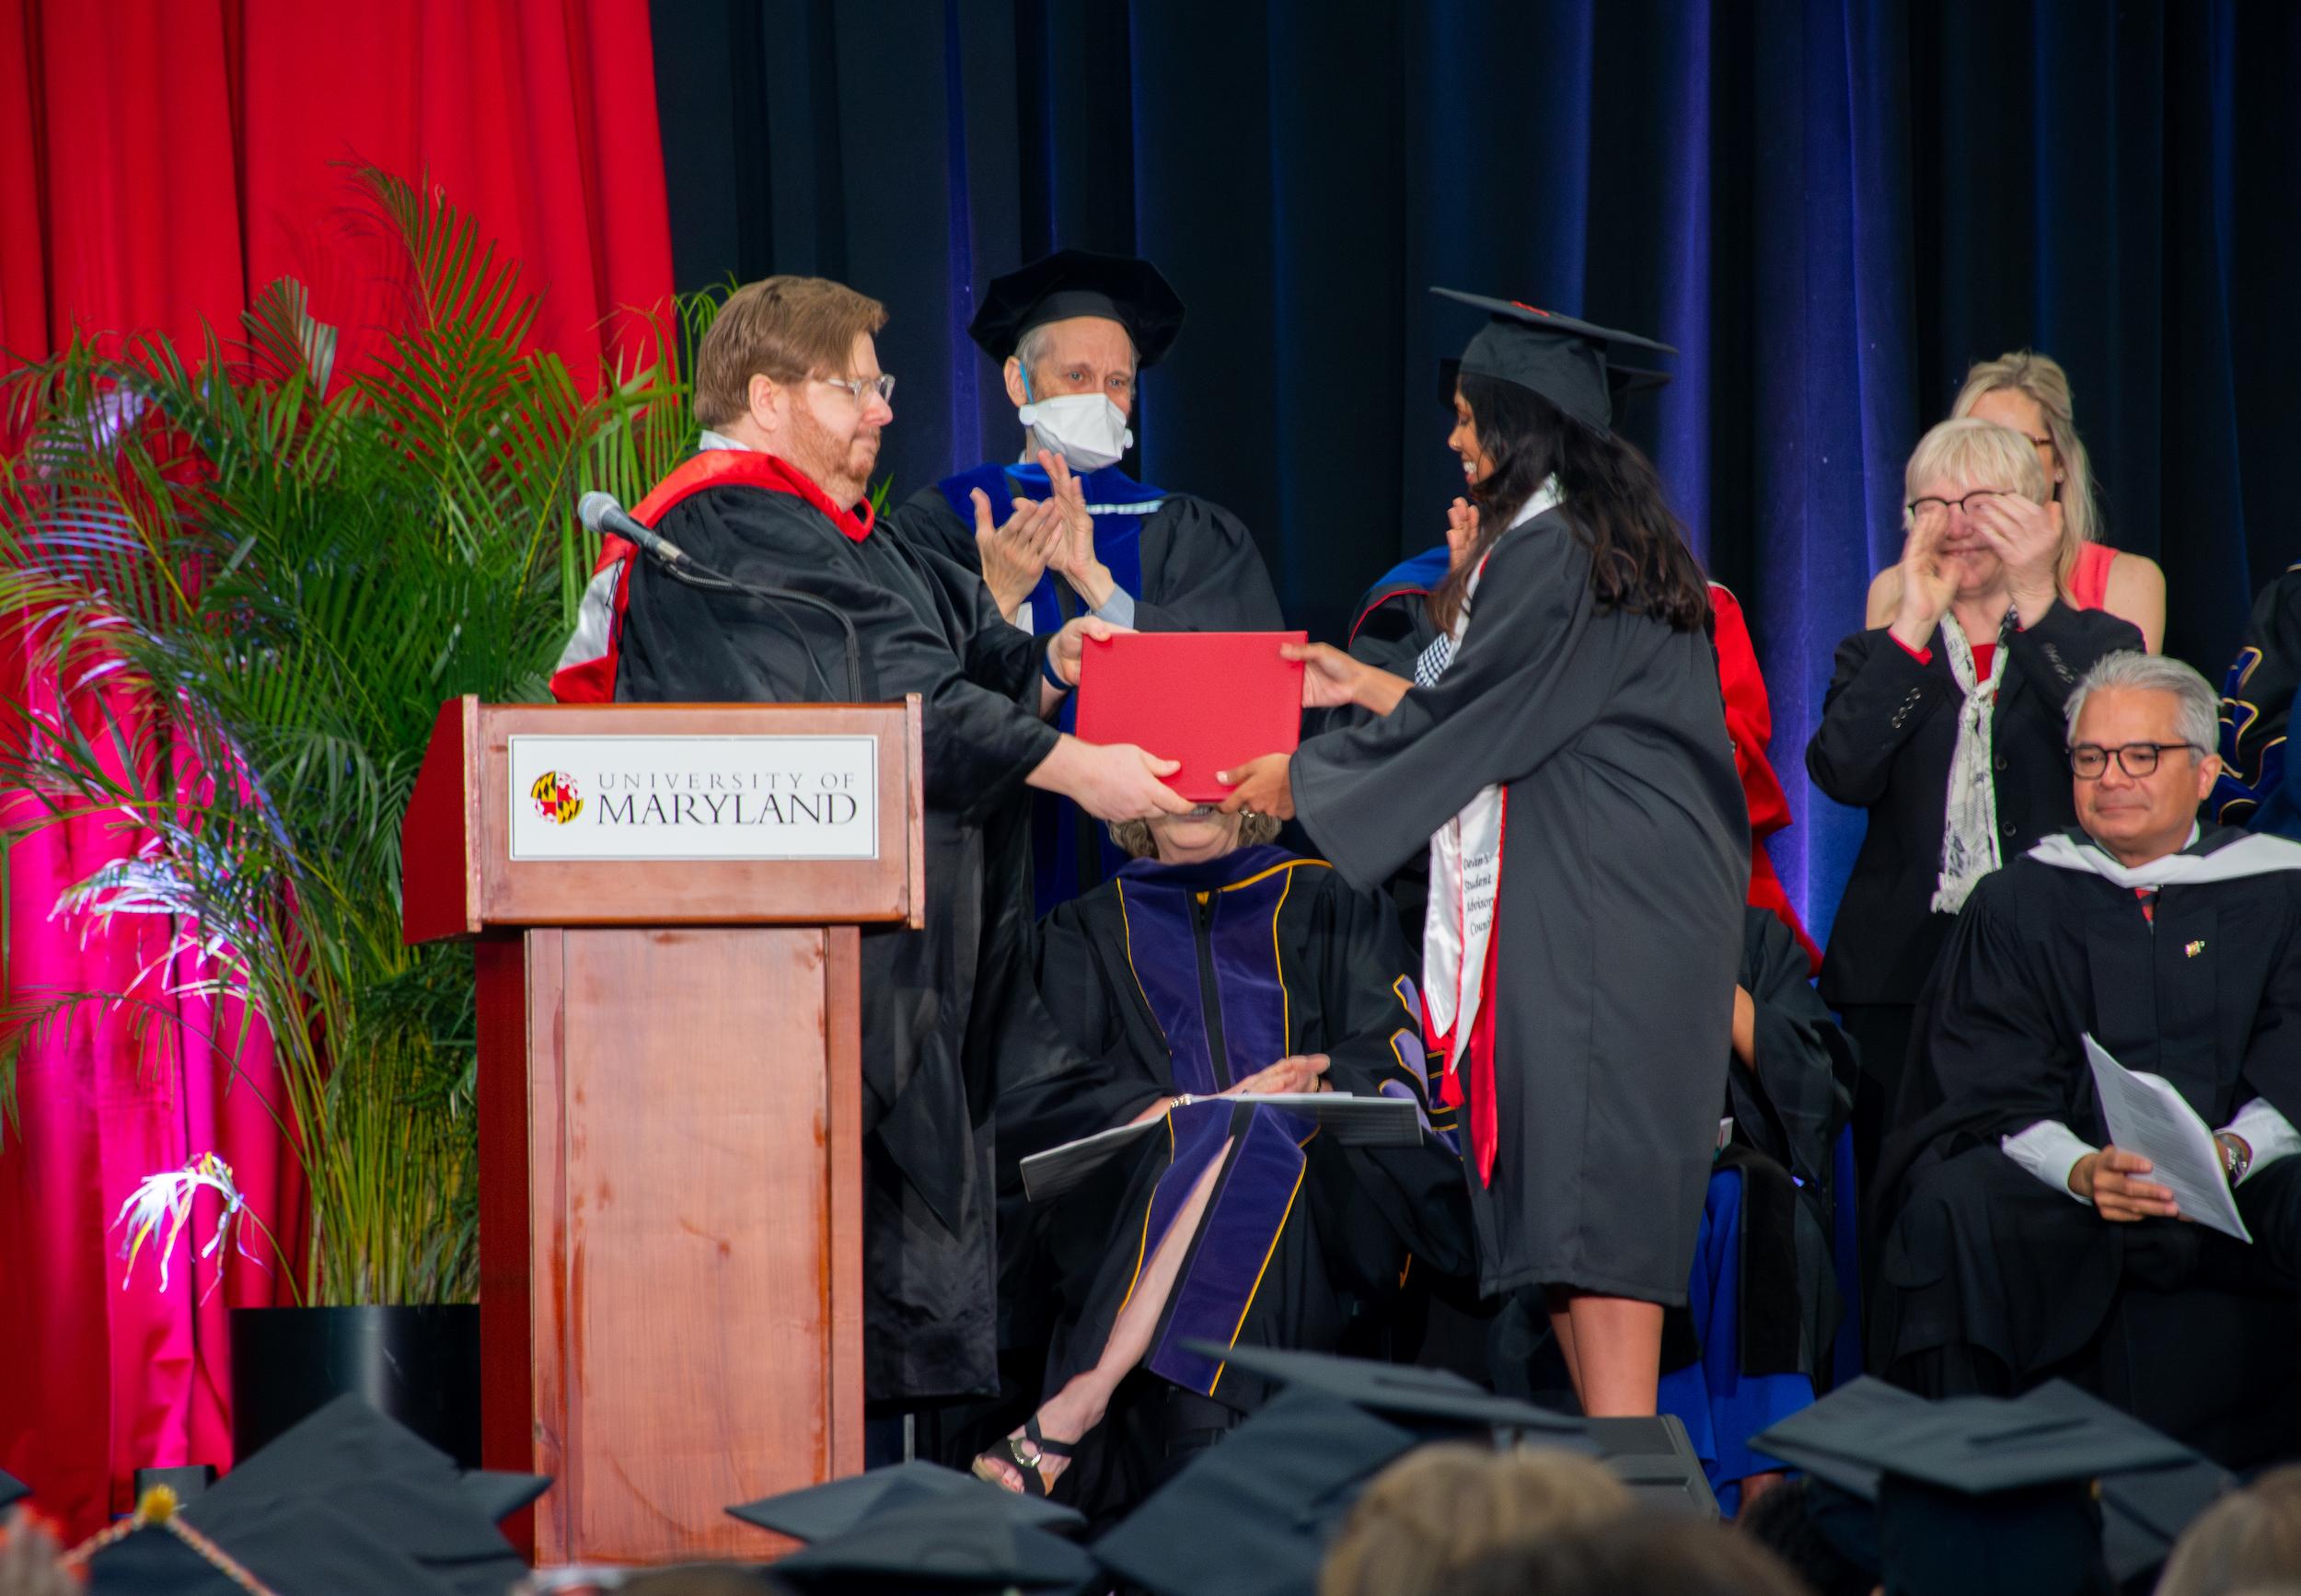 Merrill student given award at commencement